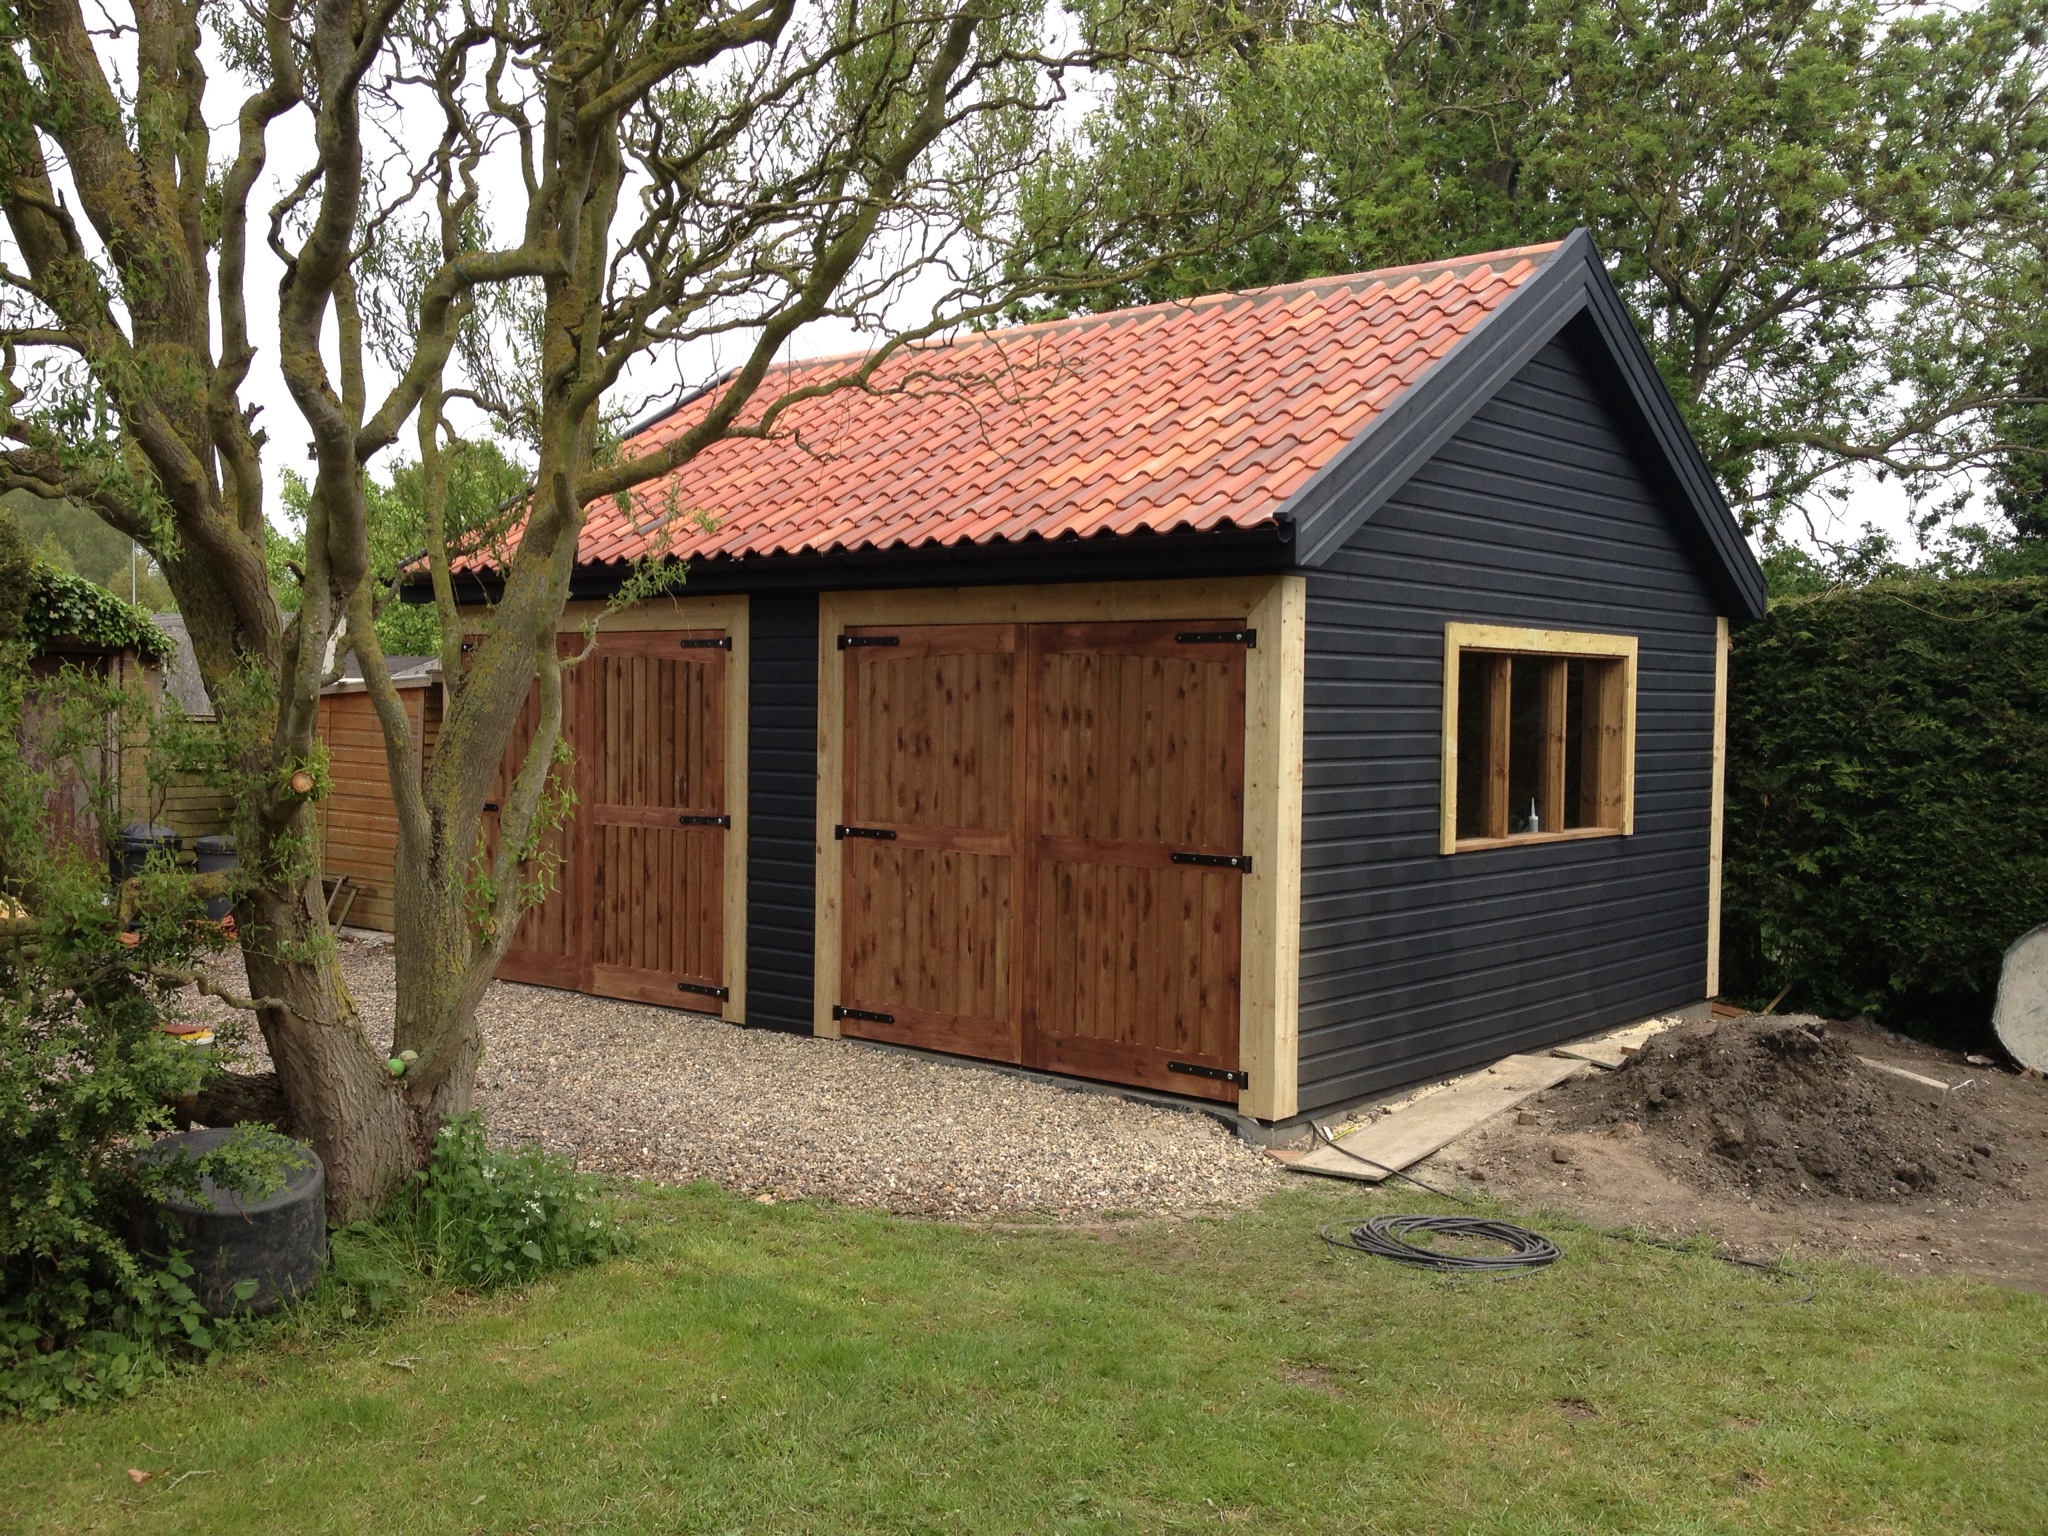 Our most recent project was a timber-framed garage/workshop for a ...